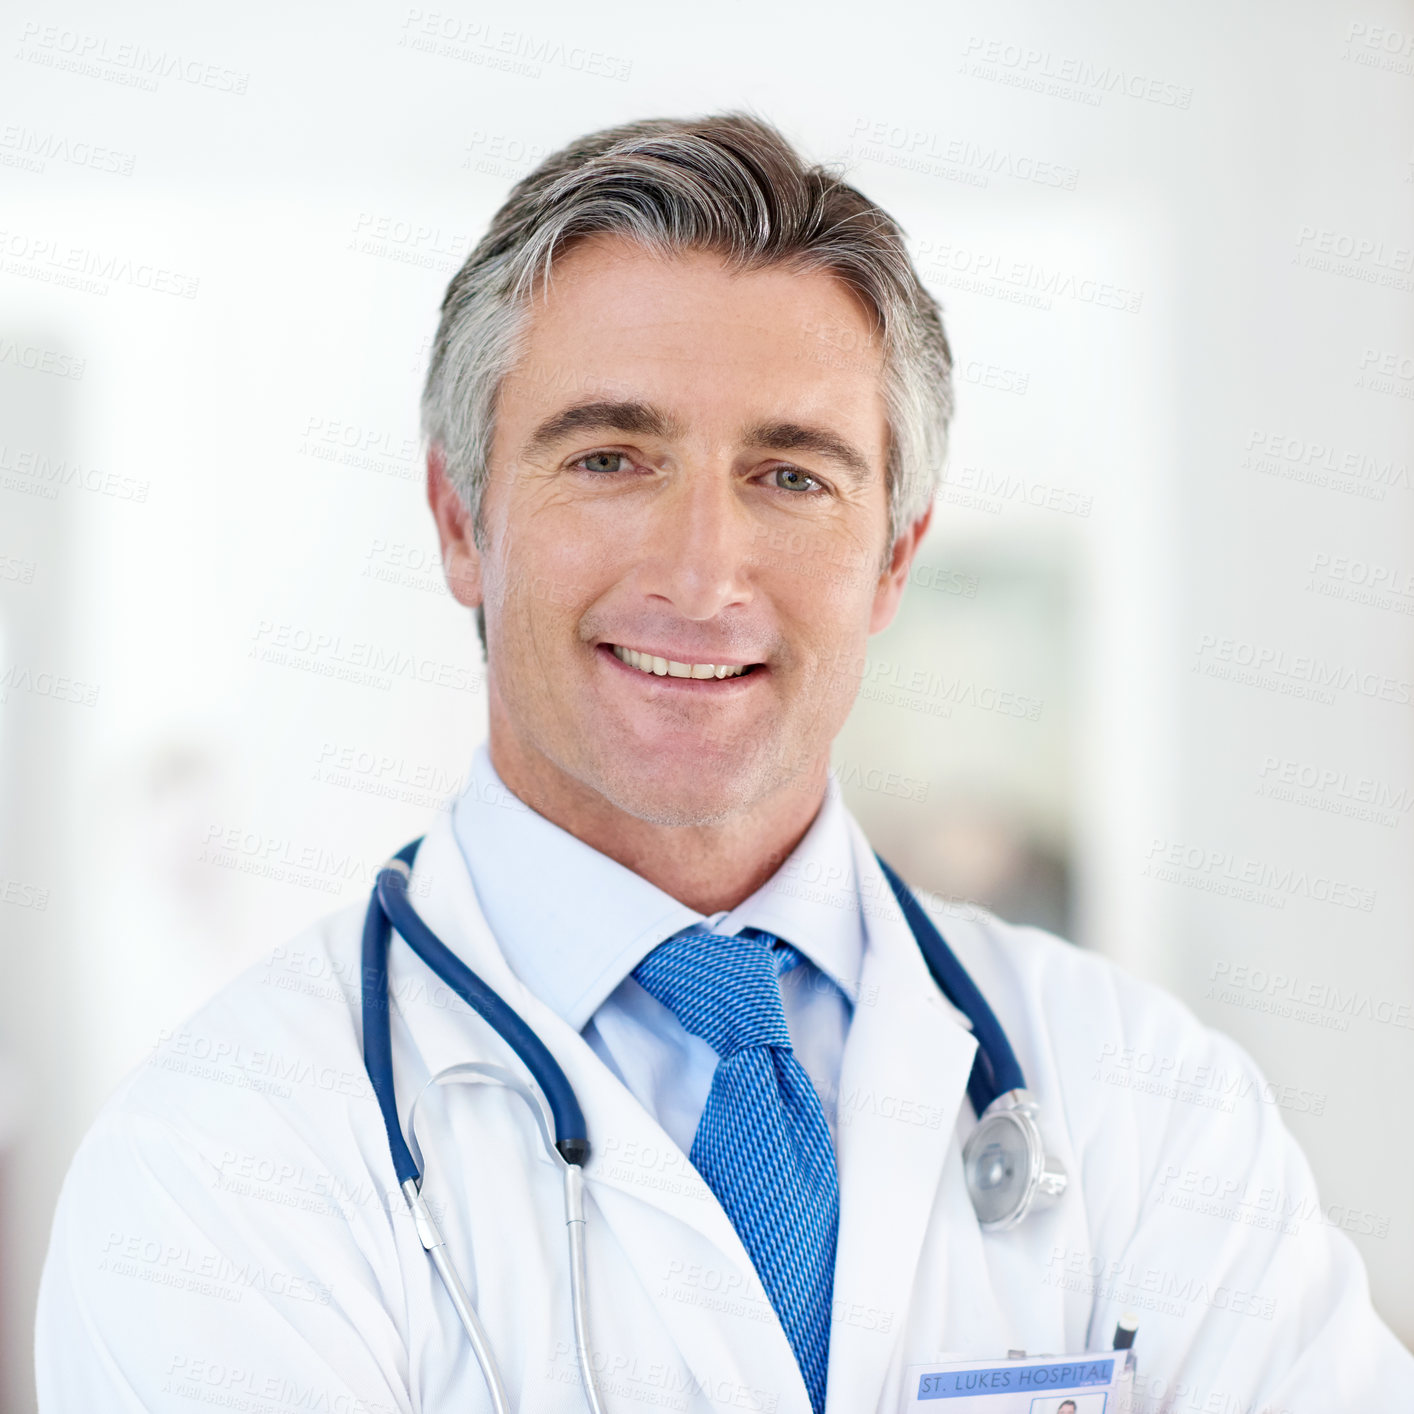 Buy stock photo Portrait of a male doctor standing in a hospital corridor